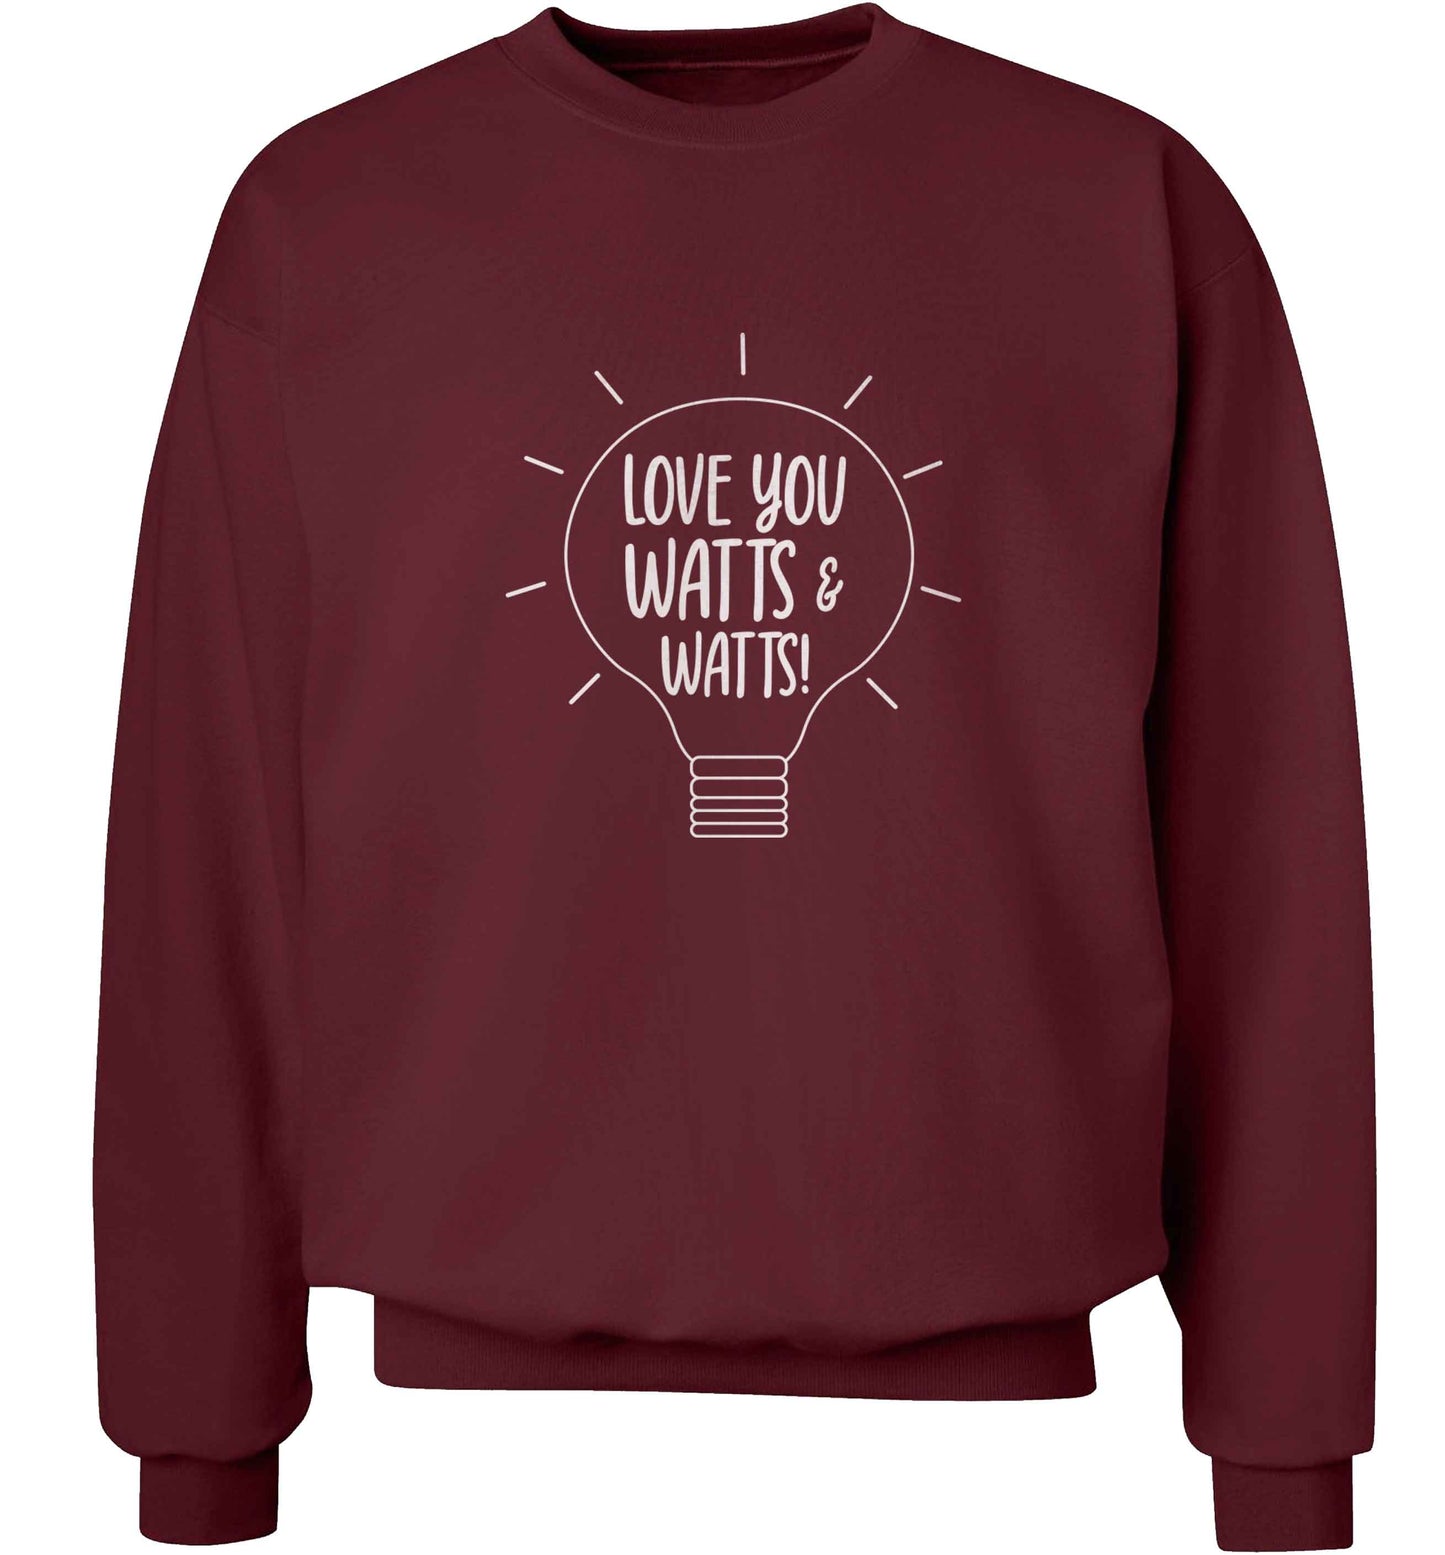 I love you watts and watts adult's unisex maroon sweater 2XL